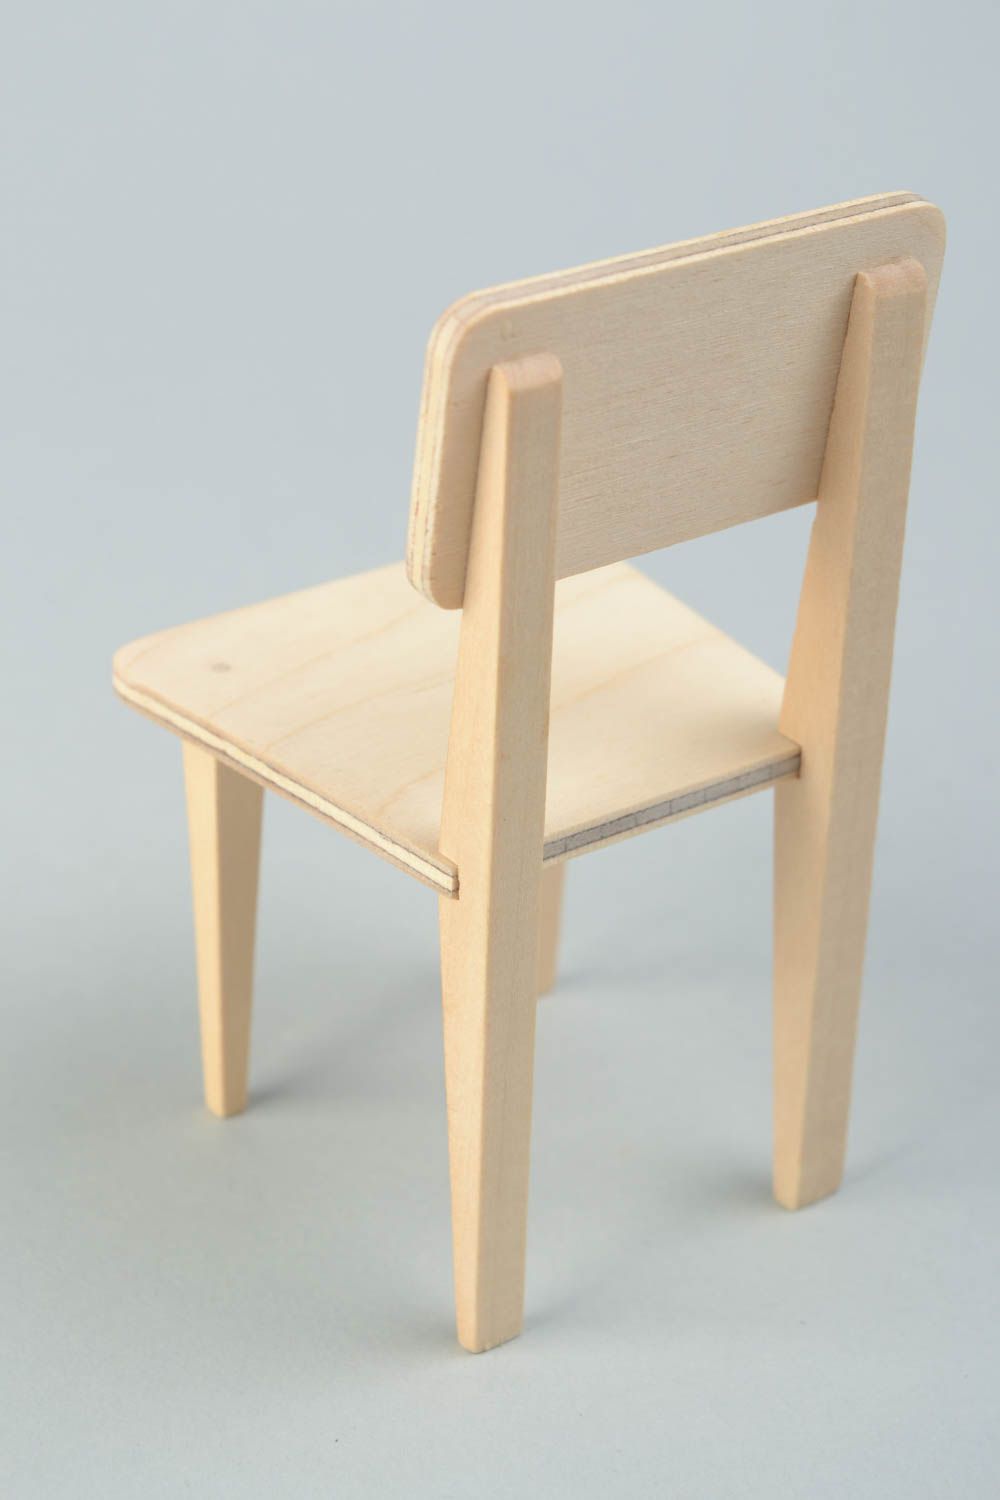 Handmade wooden craft blank doll furniture chair for painting or decoupage photo 4